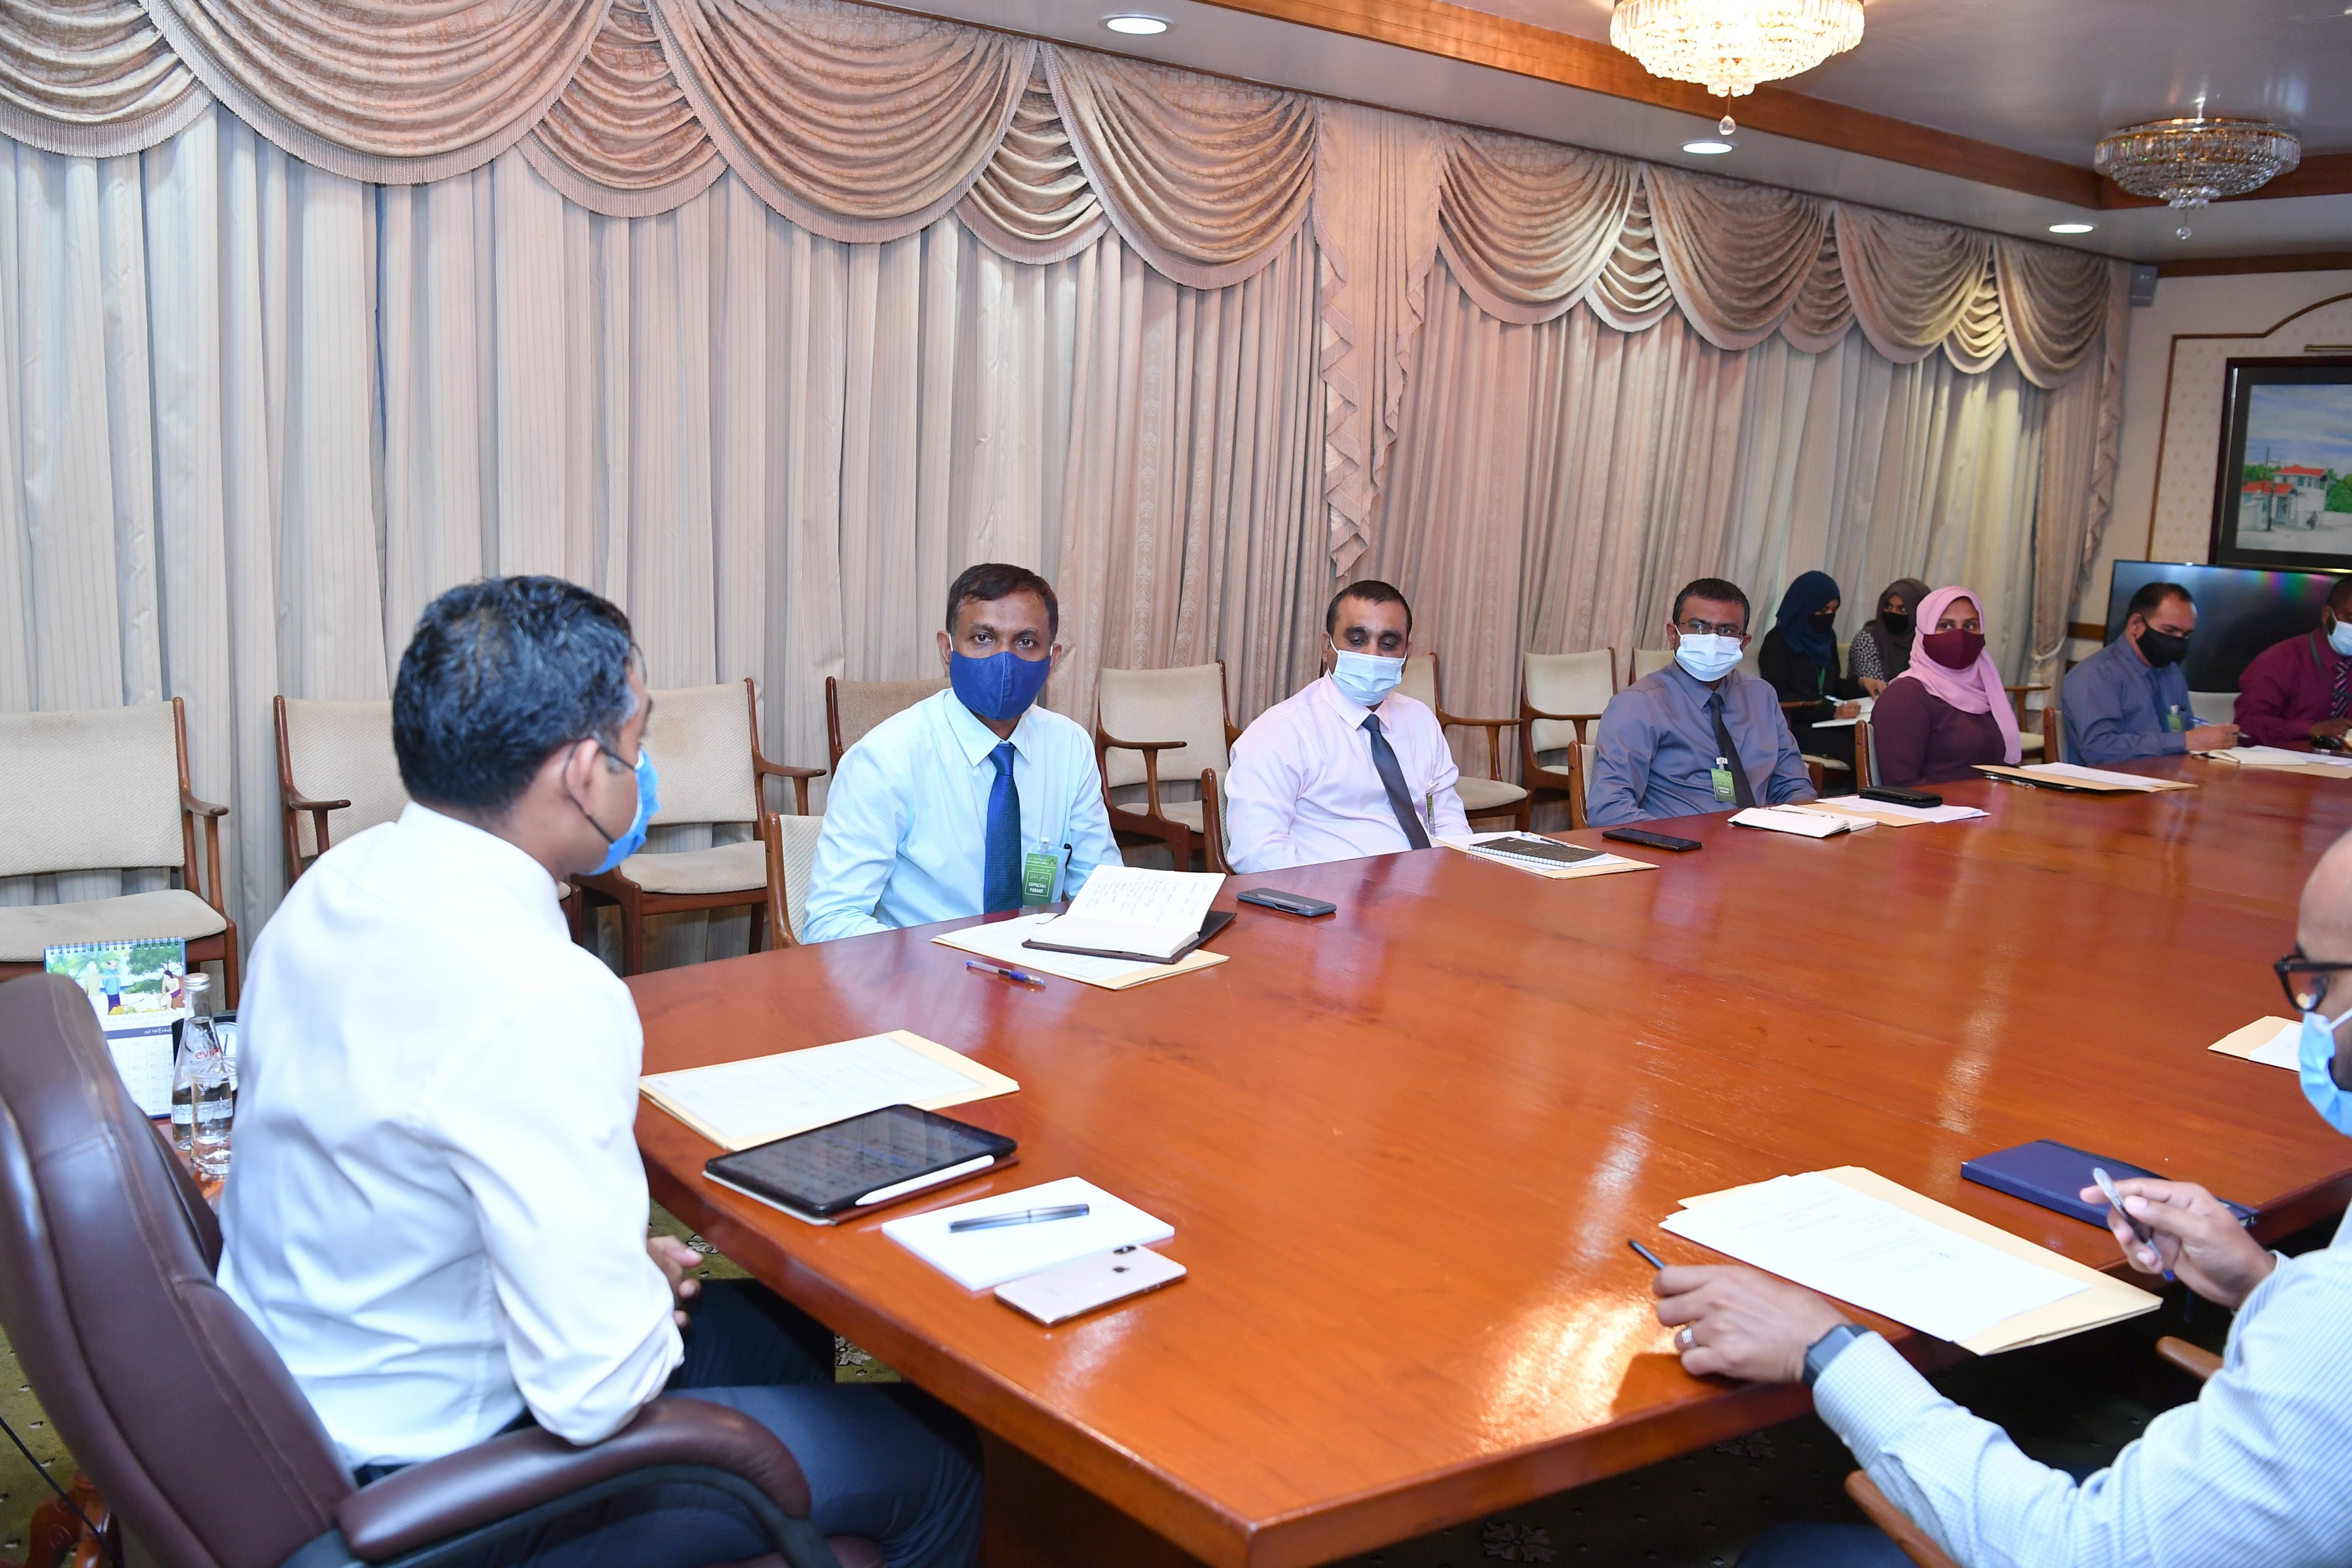 Vice President Faisal Naseem meets the newly appointed members of the Civil Service Commission (CSC). Photo: President’s Office.